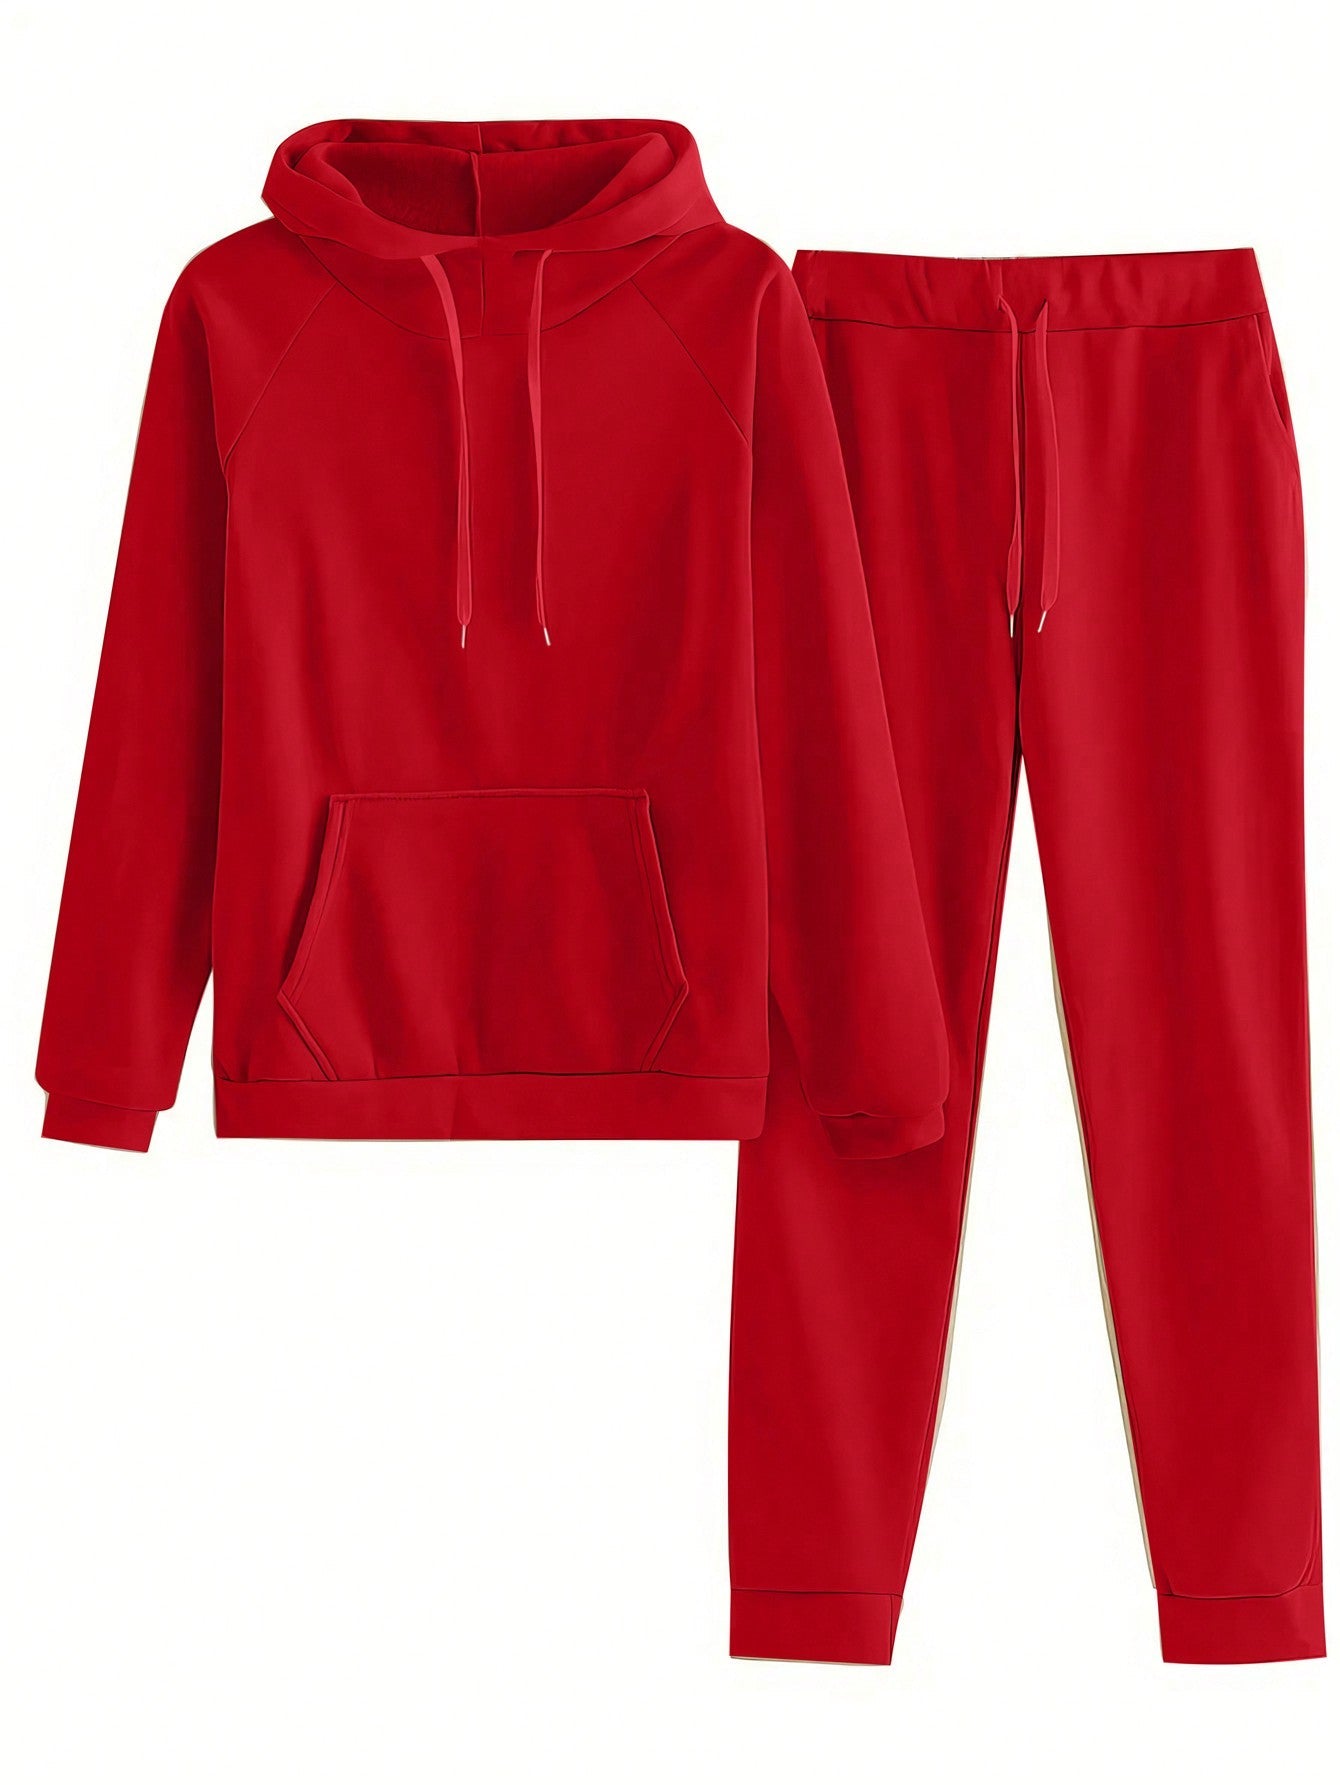 Women's Solid Color Drawstring Hooded Sweatshirt And Sweatpants Two-piece Set